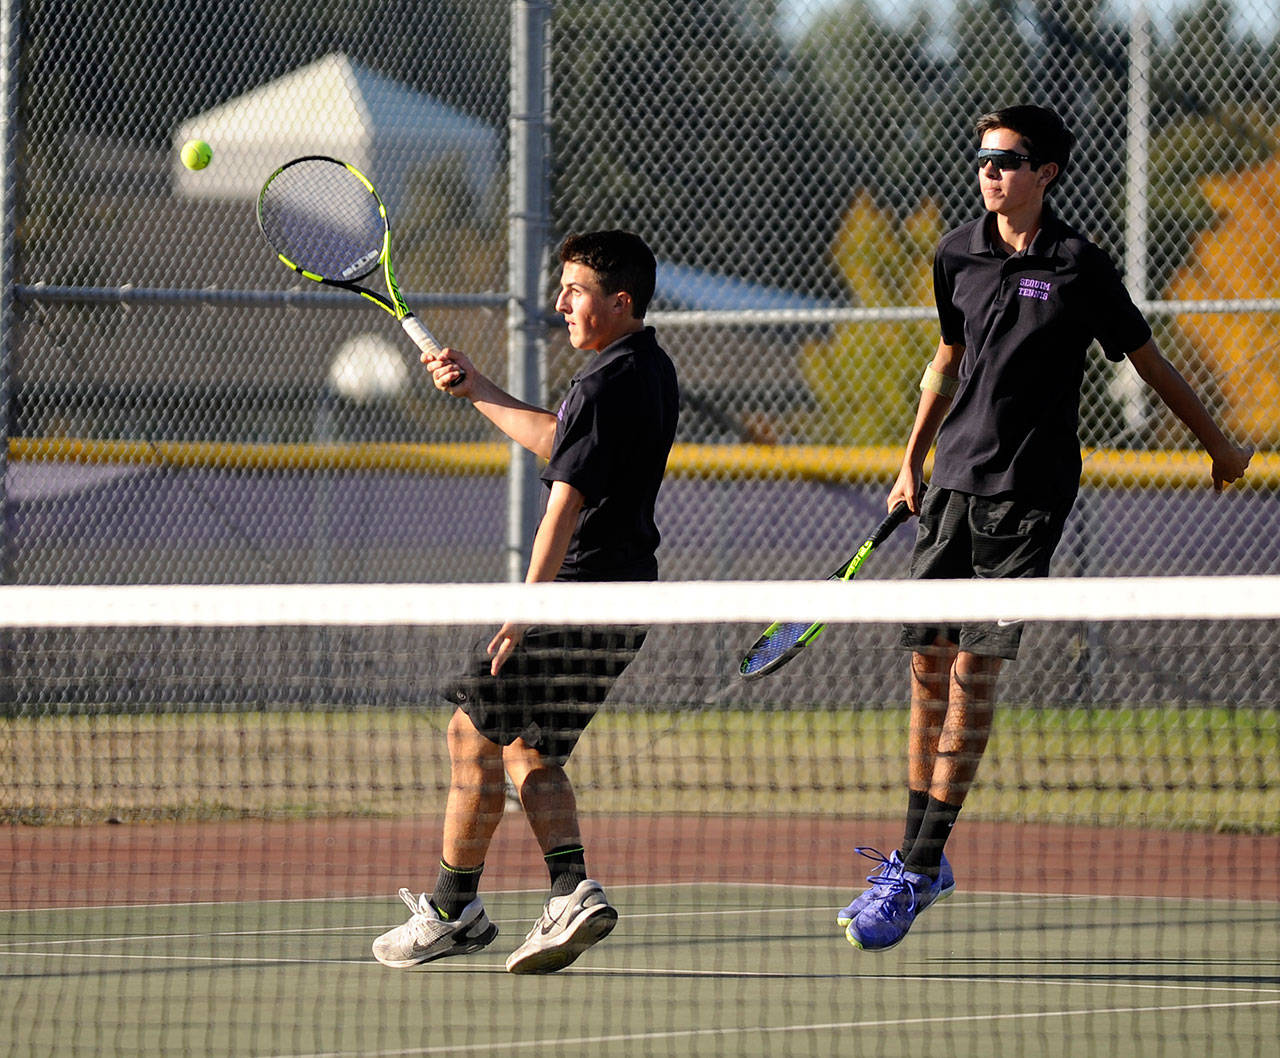 Boys tennis: Riders edge past Wolves for third place